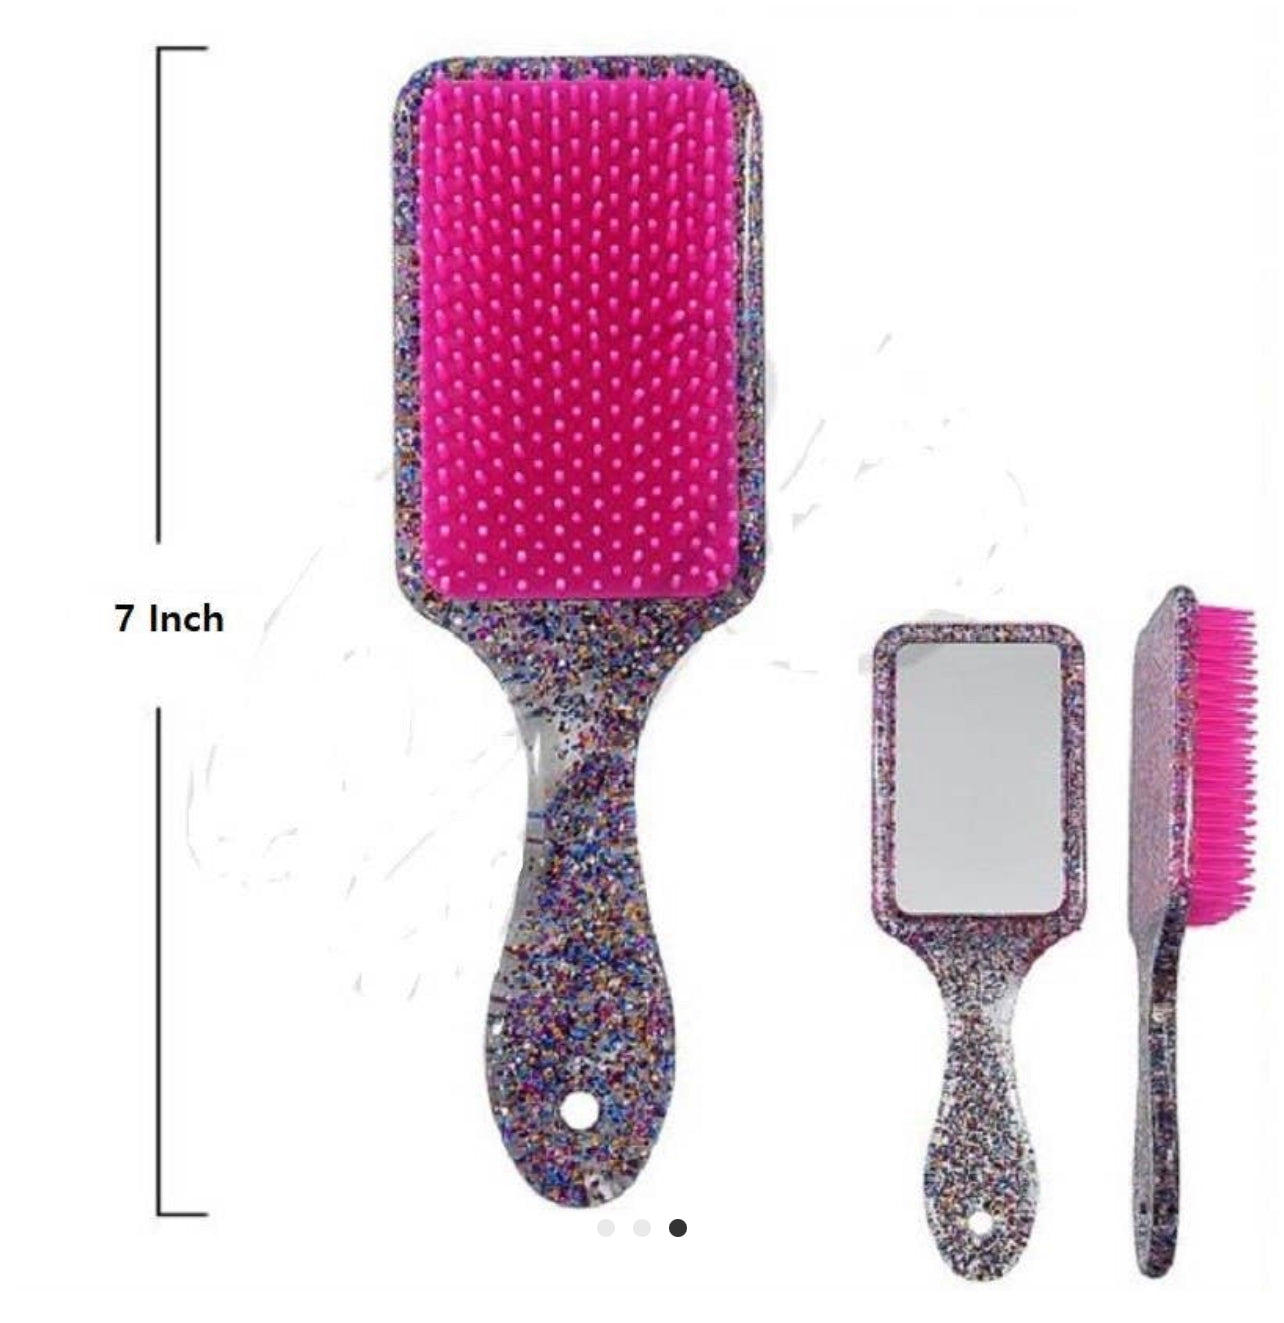 Hair brush with mirror